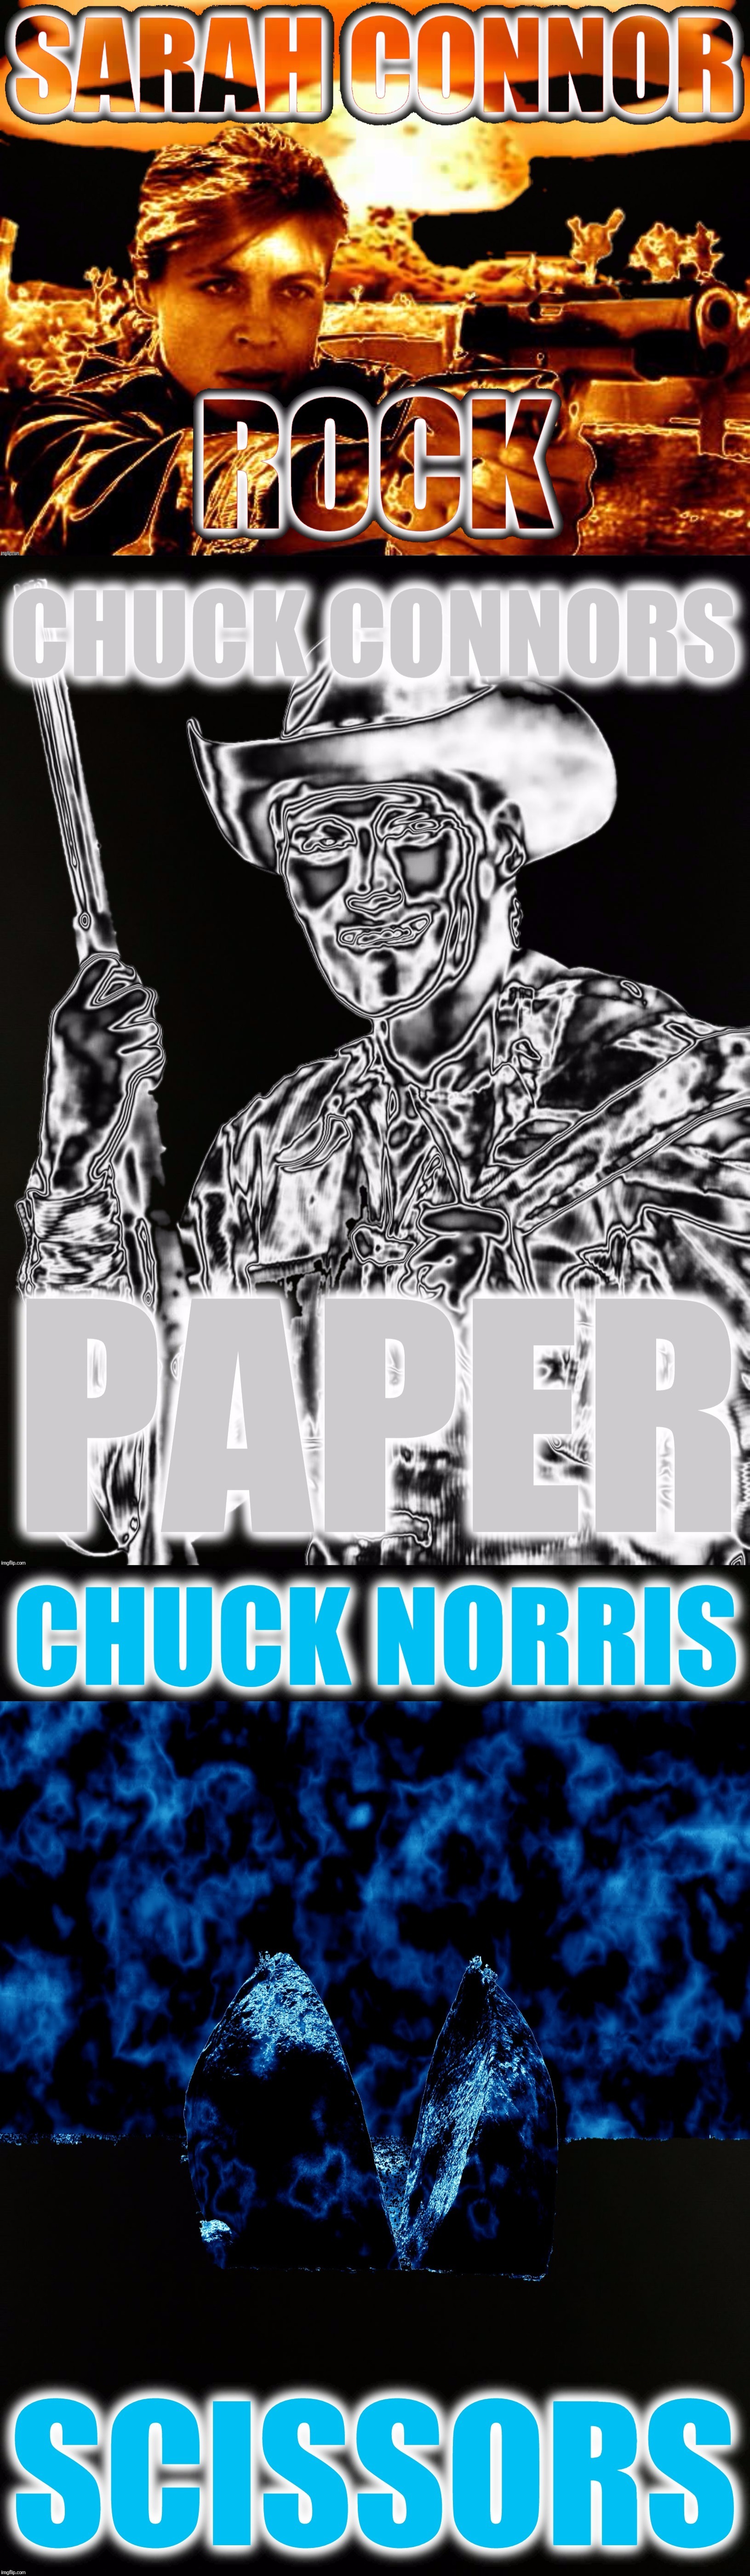 Chuck Norris played Rock Paper Scissors ONCE. | . | image tagged in sarah connor,chuck connors,chuck norris,rock paper scissors | made w/ Imgflip meme maker